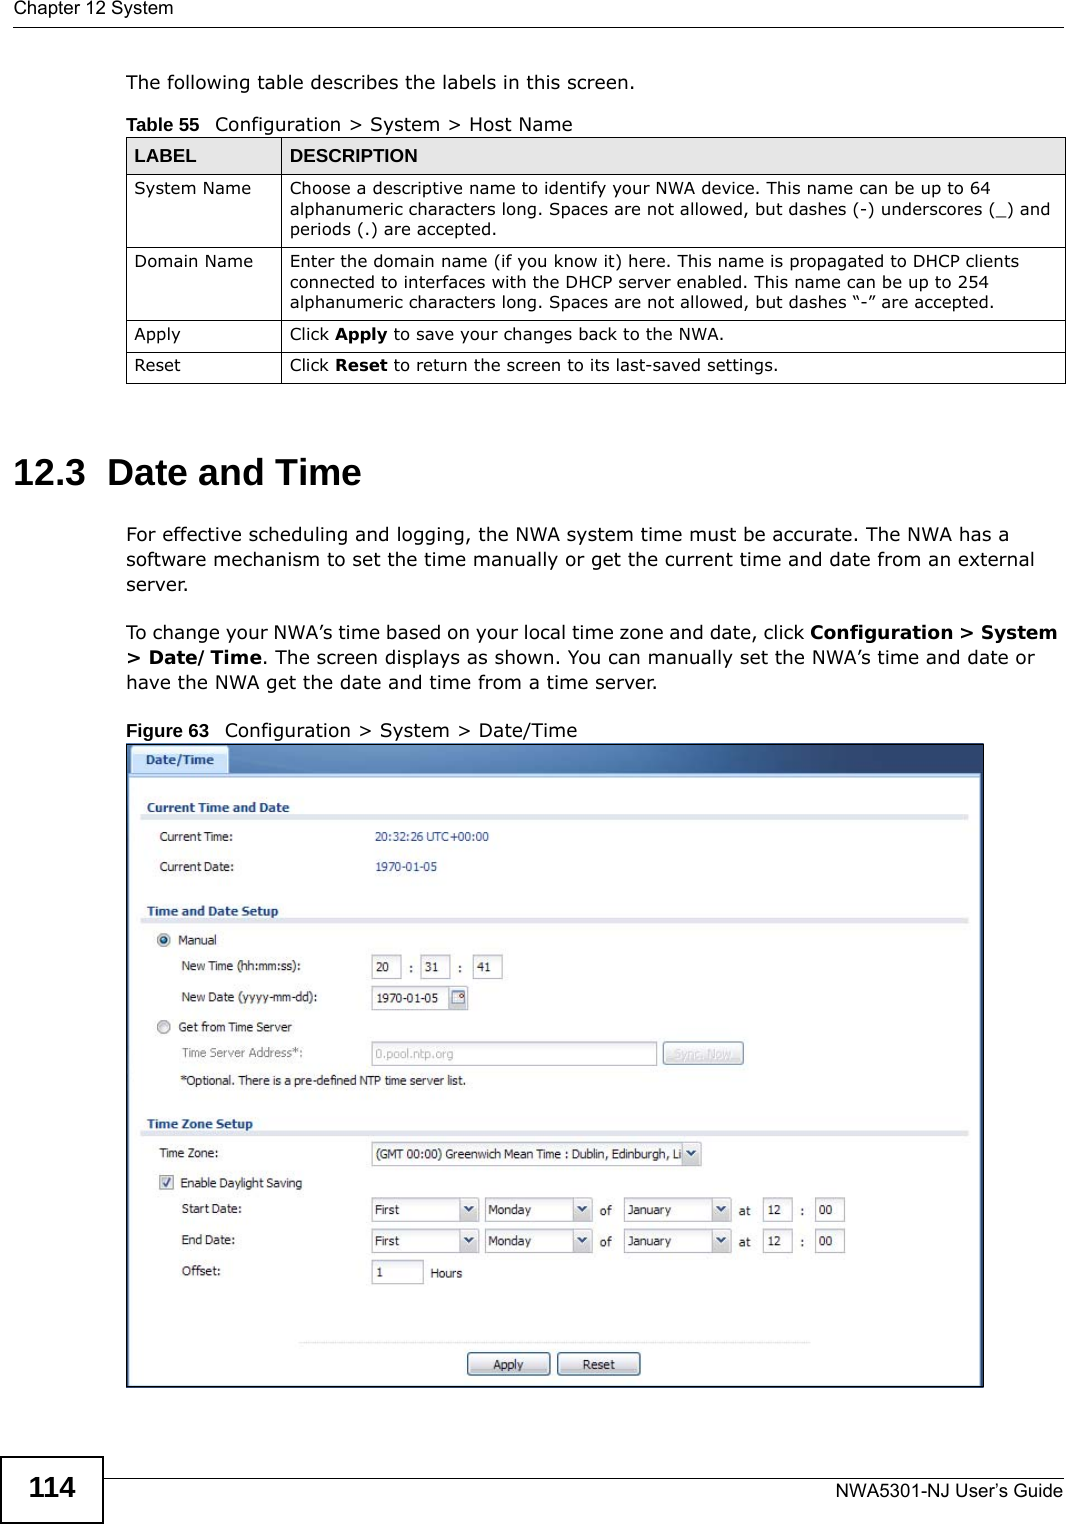 Chapter 12 SystemNWA5301-NJ User’s Guide114The following table describes the labels in this screen.  12.3  Date and Time For effective scheduling and logging, the NWA system time must be accurate. The NWA has a software mechanism to set the time manually or get the current time and date from an external server.To change your NWA’s time based on your local time zone and date, click Configuration &gt; System &gt; Date/Time. The screen displays as shown. You can manually set the NWA’s time and date or have the NWA get the date and time from a time server.Figure 63   Configuration &gt; System &gt; Date/TimeTable 55   Configuration &gt; System &gt; Host NameLABEL DESCRIPTIONSystem Name Choose a descriptive name to identify your NWA device. This name can be up to 64 alphanumeric characters long. Spaces are not allowed, but dashes (-) underscores (_) and periods (.) are accepted.Domain Name Enter the domain name (if you know it) here. This name is propagated to DHCP clients connected to interfaces with the DHCP server enabled. This name can be up to 254 alphanumeric characters long. Spaces are not allowed, but dashes “-” are accepted.Apply Click Apply to save your changes back to the NWA.Reset Click Reset to return the screen to its last-saved settings. 